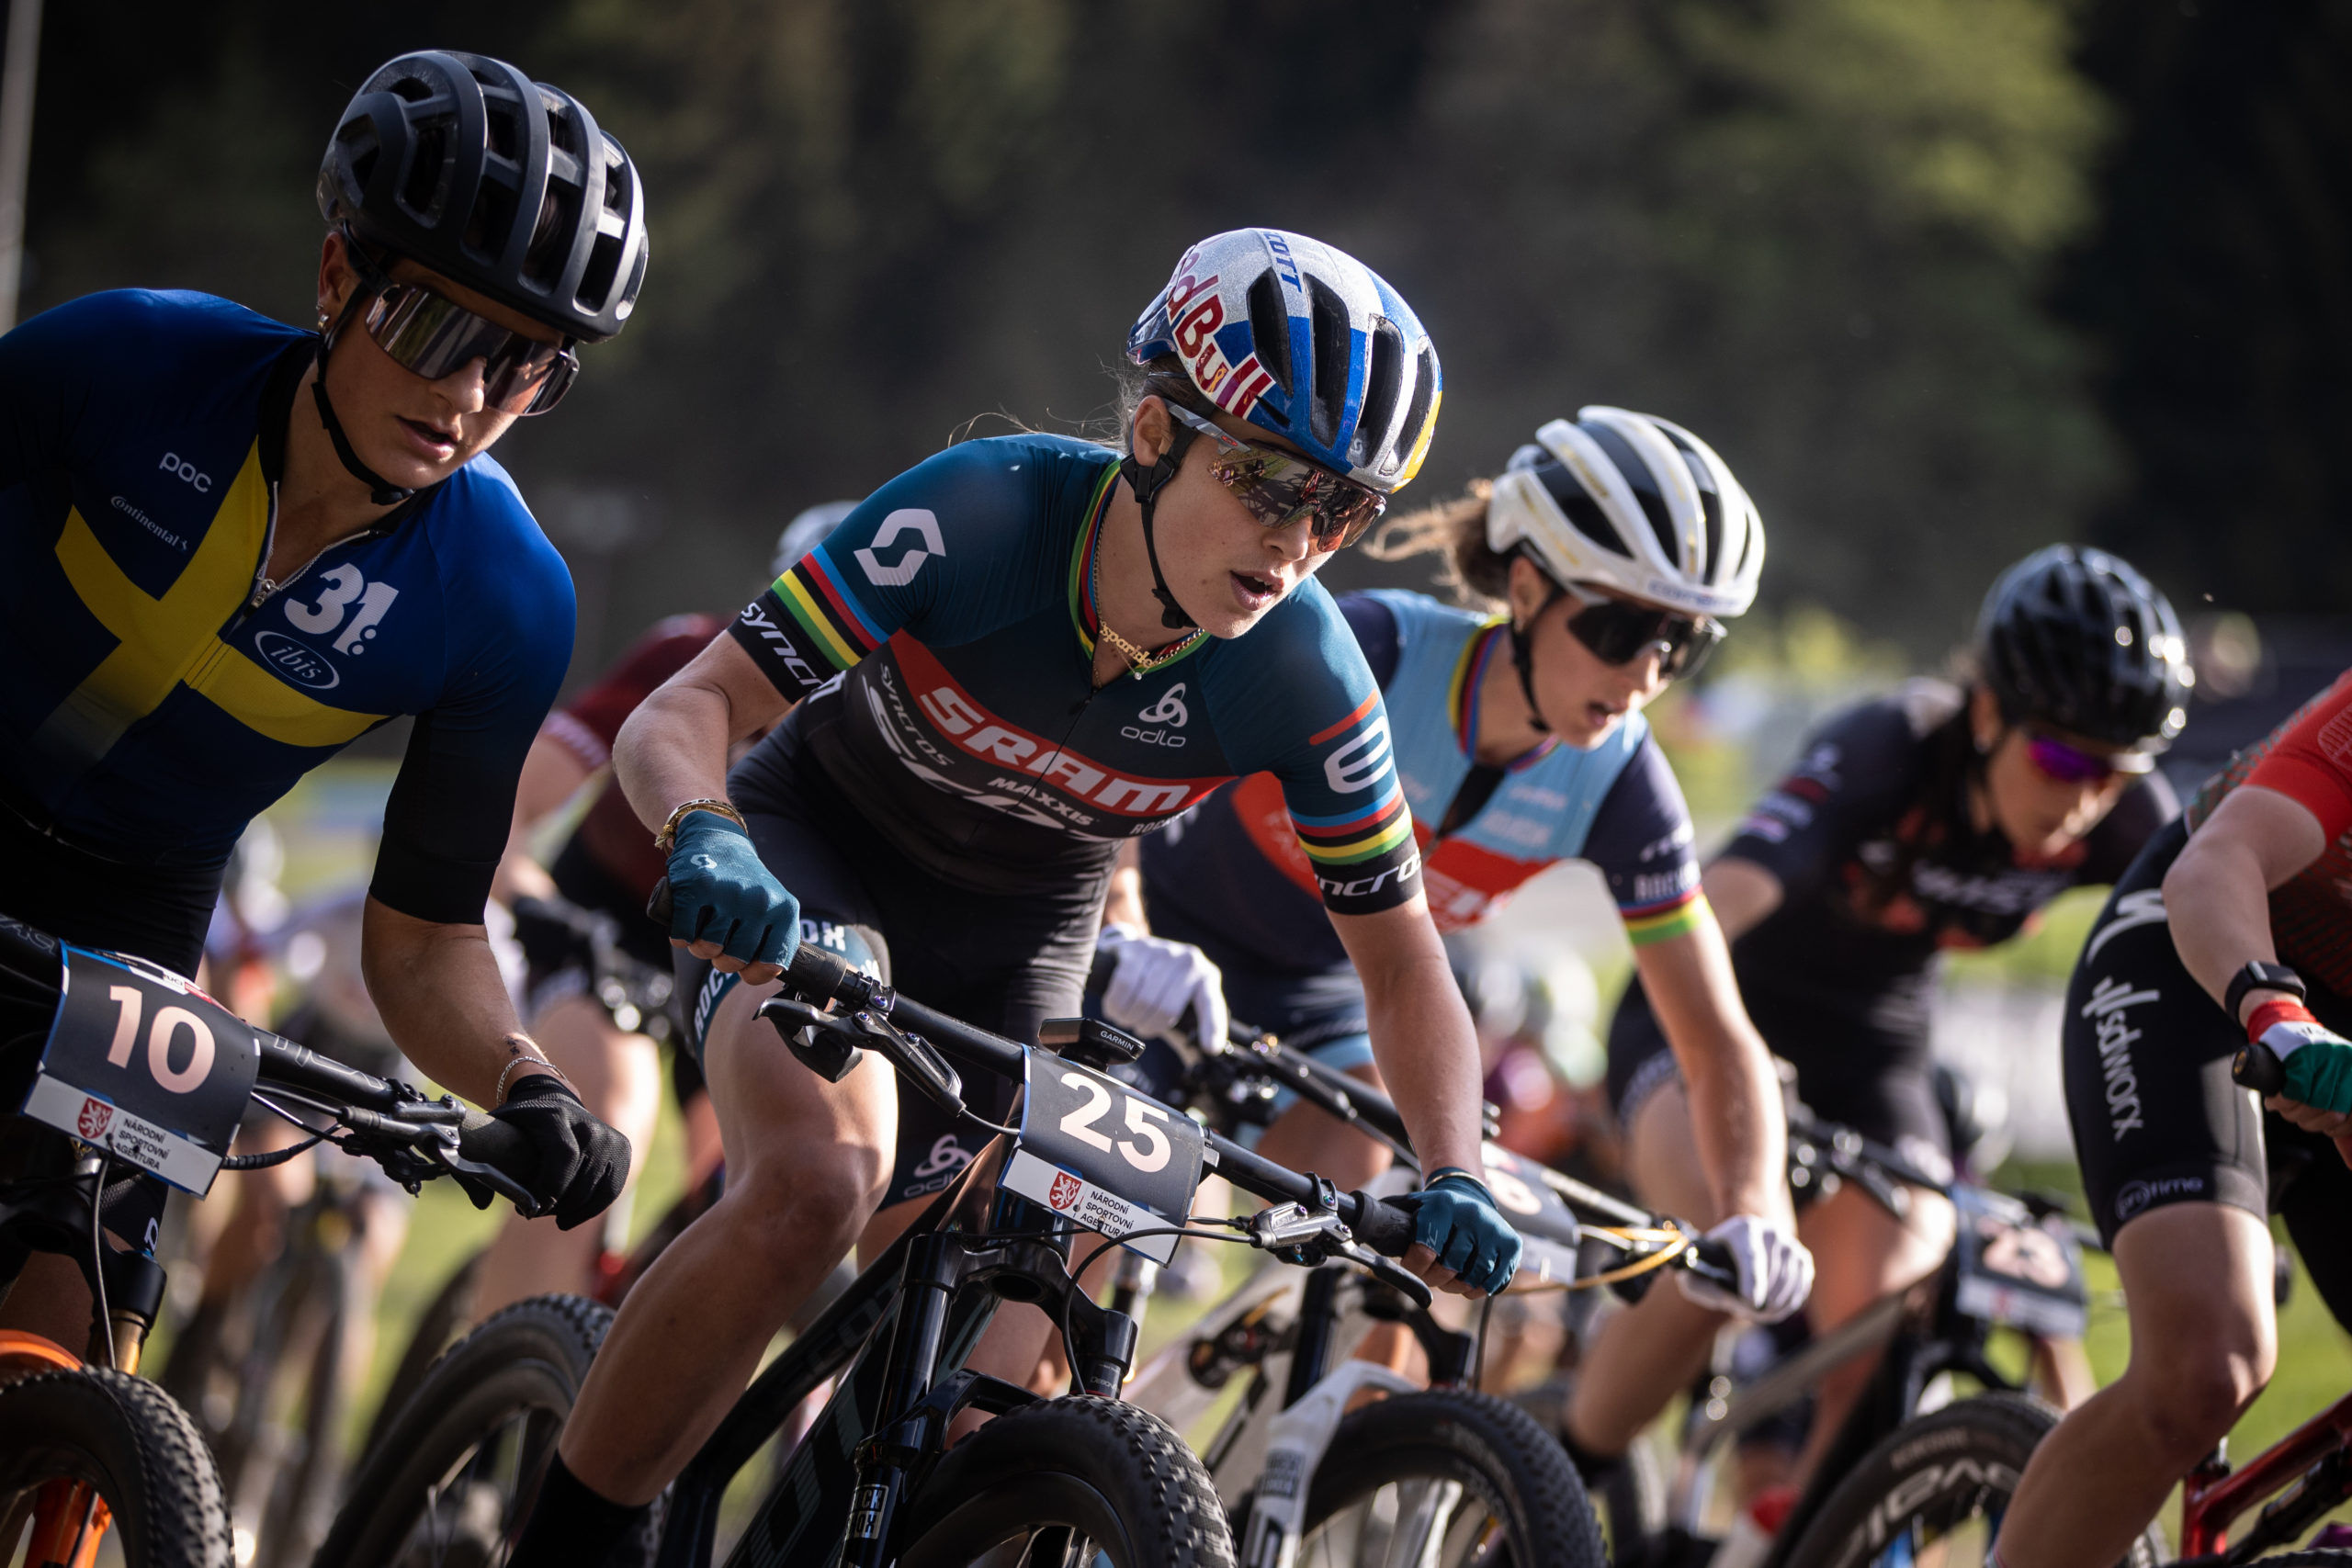 Kate Courtney leading a pack of riders in Nove Mesto